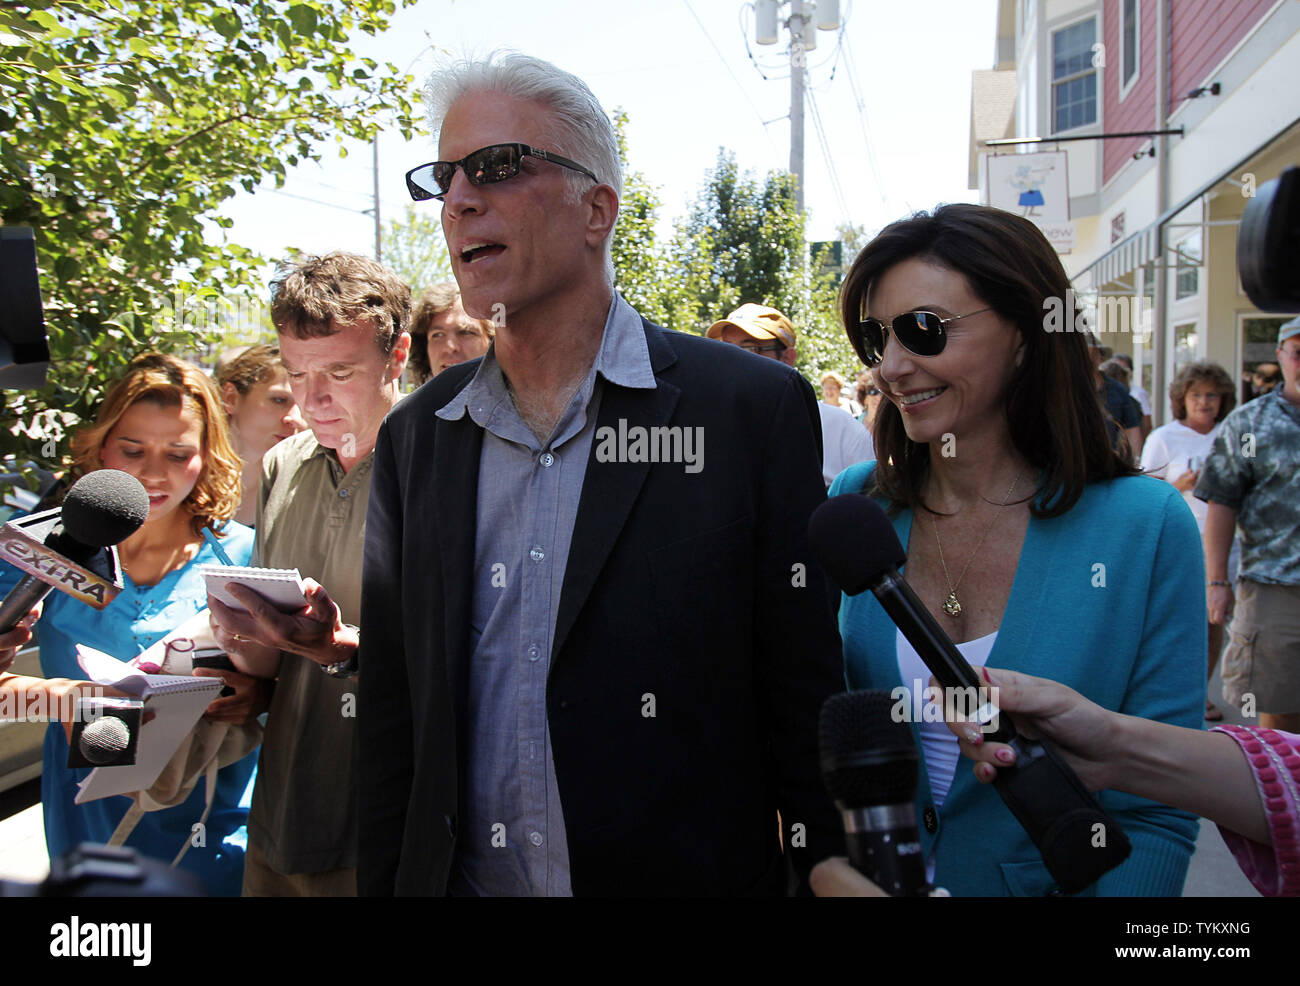 A crowd gathers around Ted Danson and Mary Steenburgen on hours before the  wedding of Chelsea